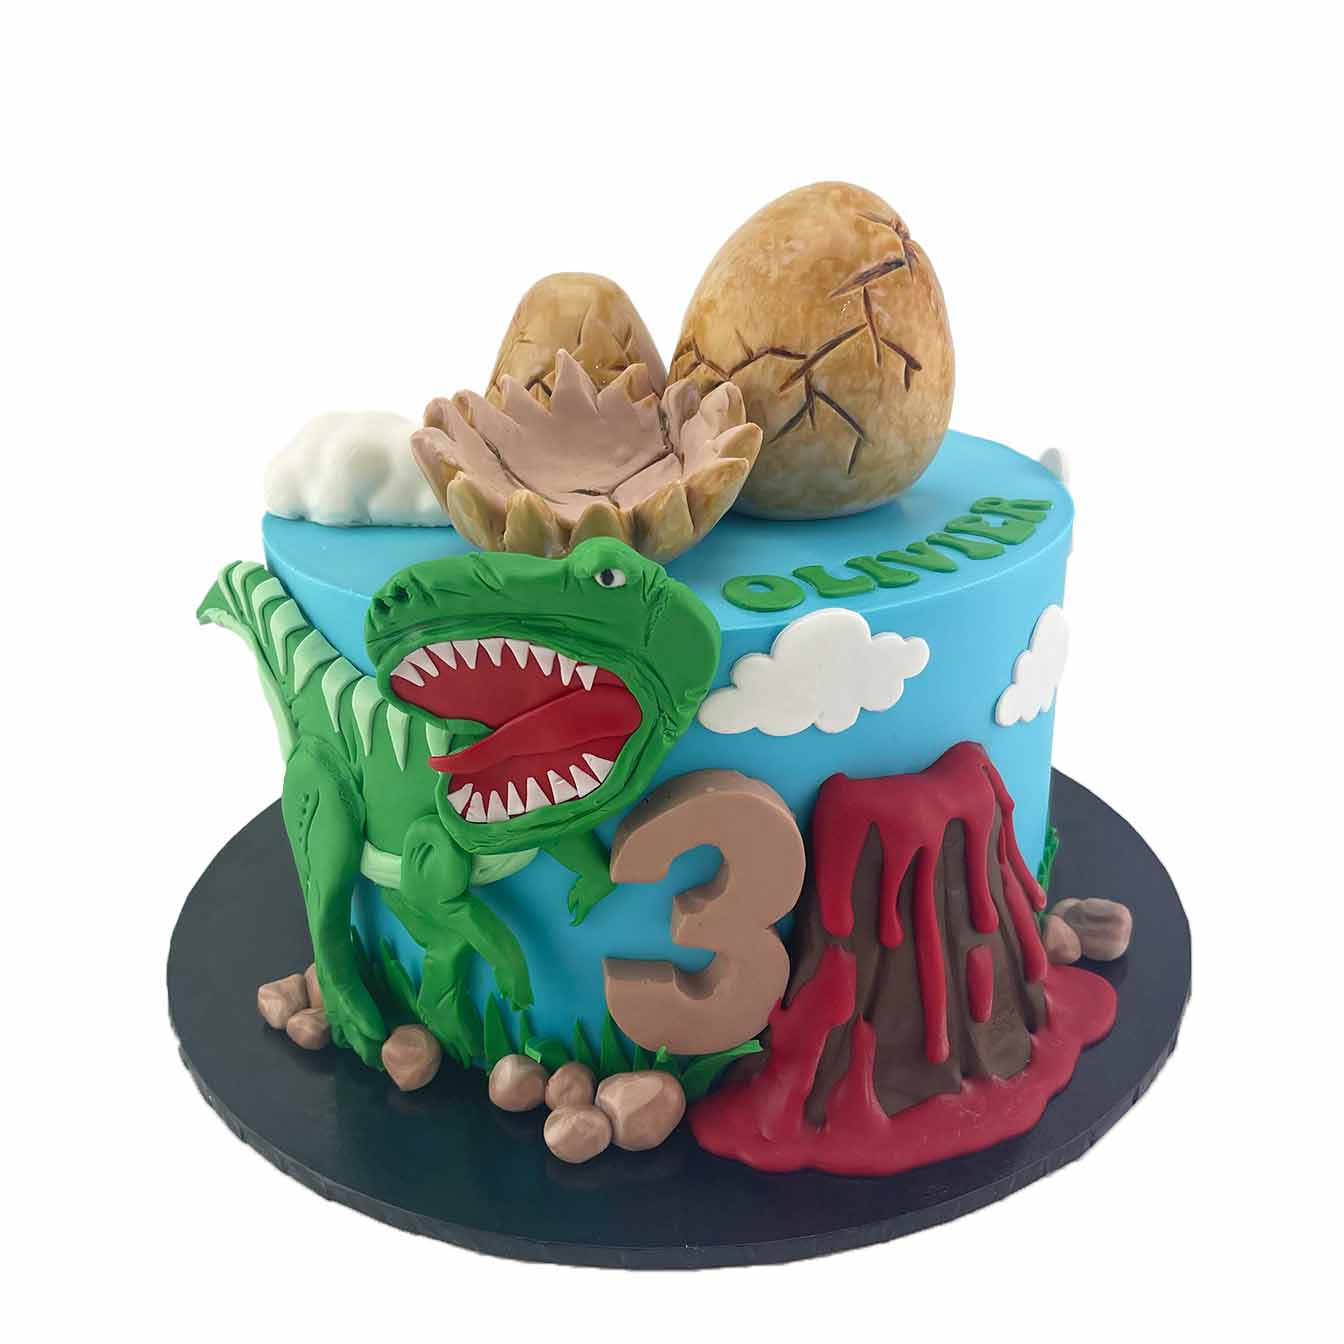 Dino Adventure Cake - A blue fondant iced cake with a volcano, 2D dinosaur cutout, and dinosaur eggs, a thrilling centerpiece for dinosaur enthusiasts and birthday celebrations.